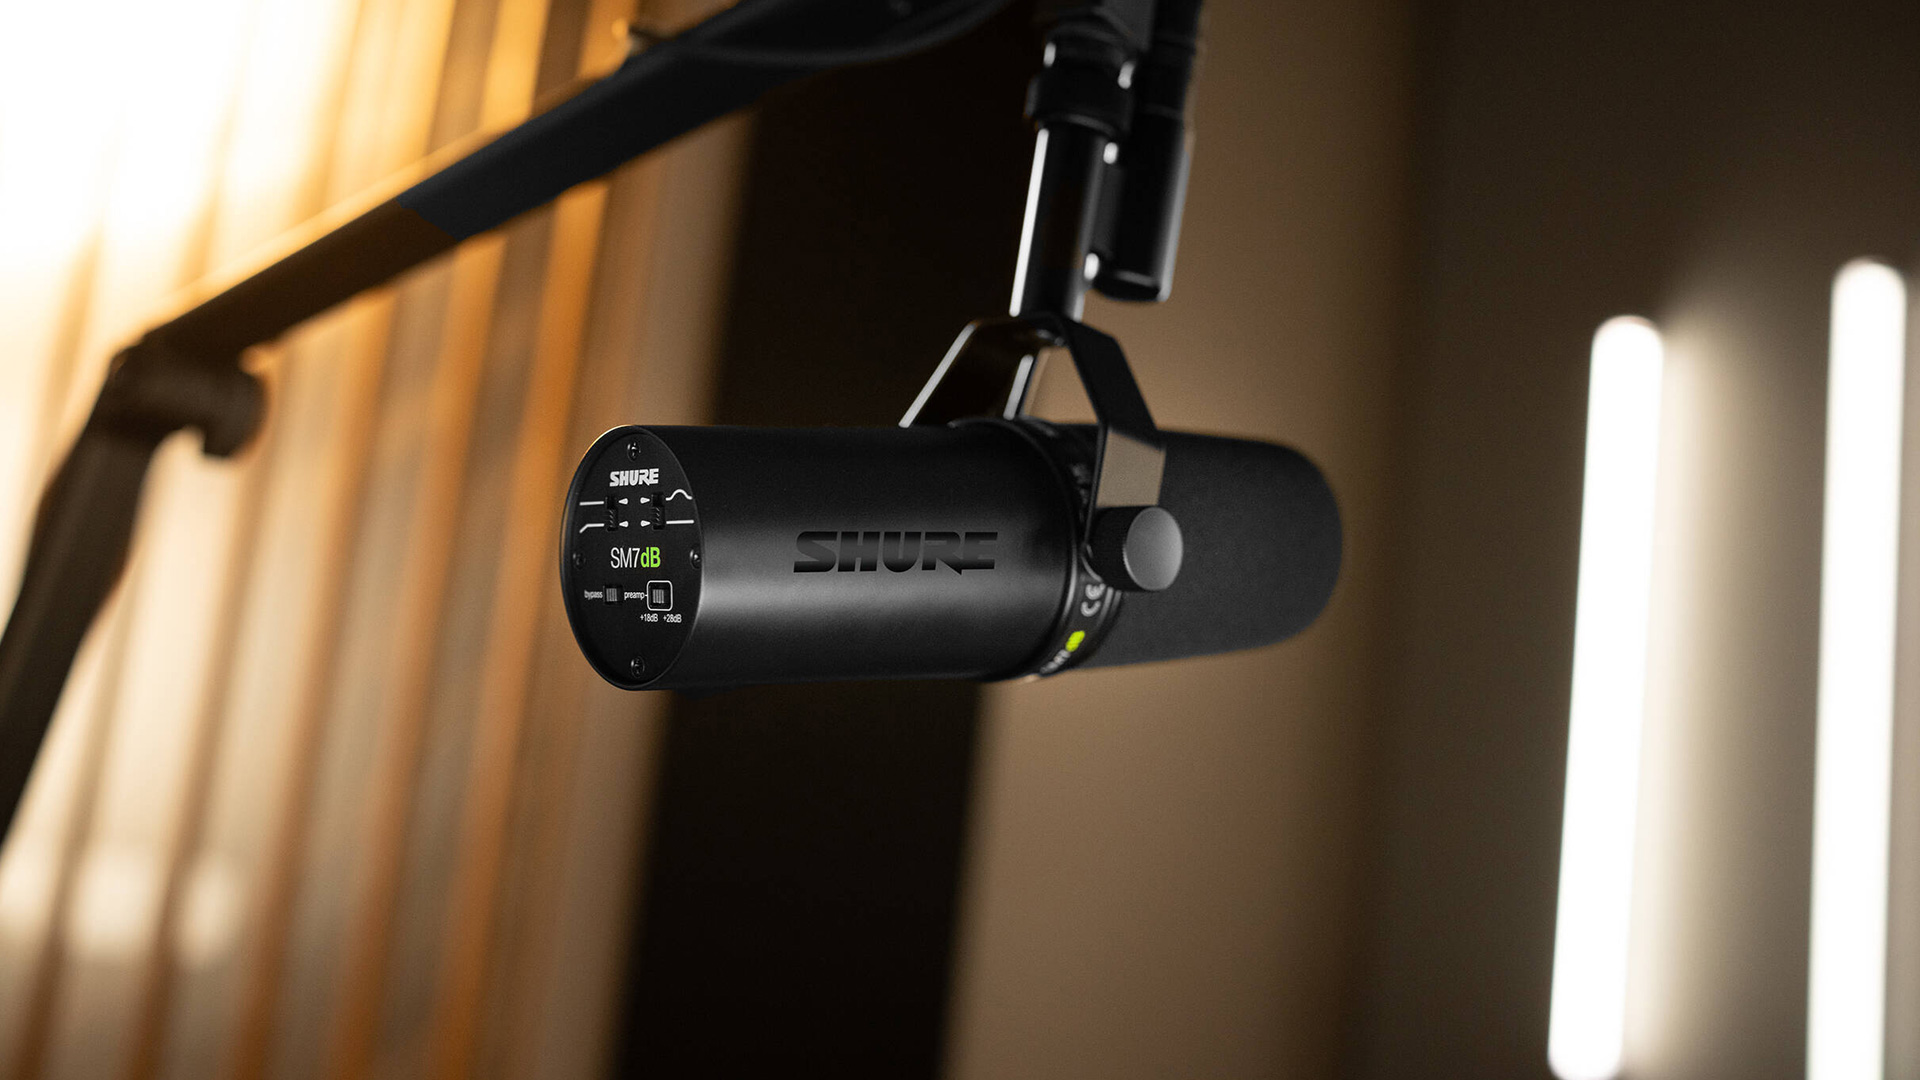 The world's most popular podcast microphone is back and better than ever:  introducing the new Shure SM7dB! It's everything you love and…